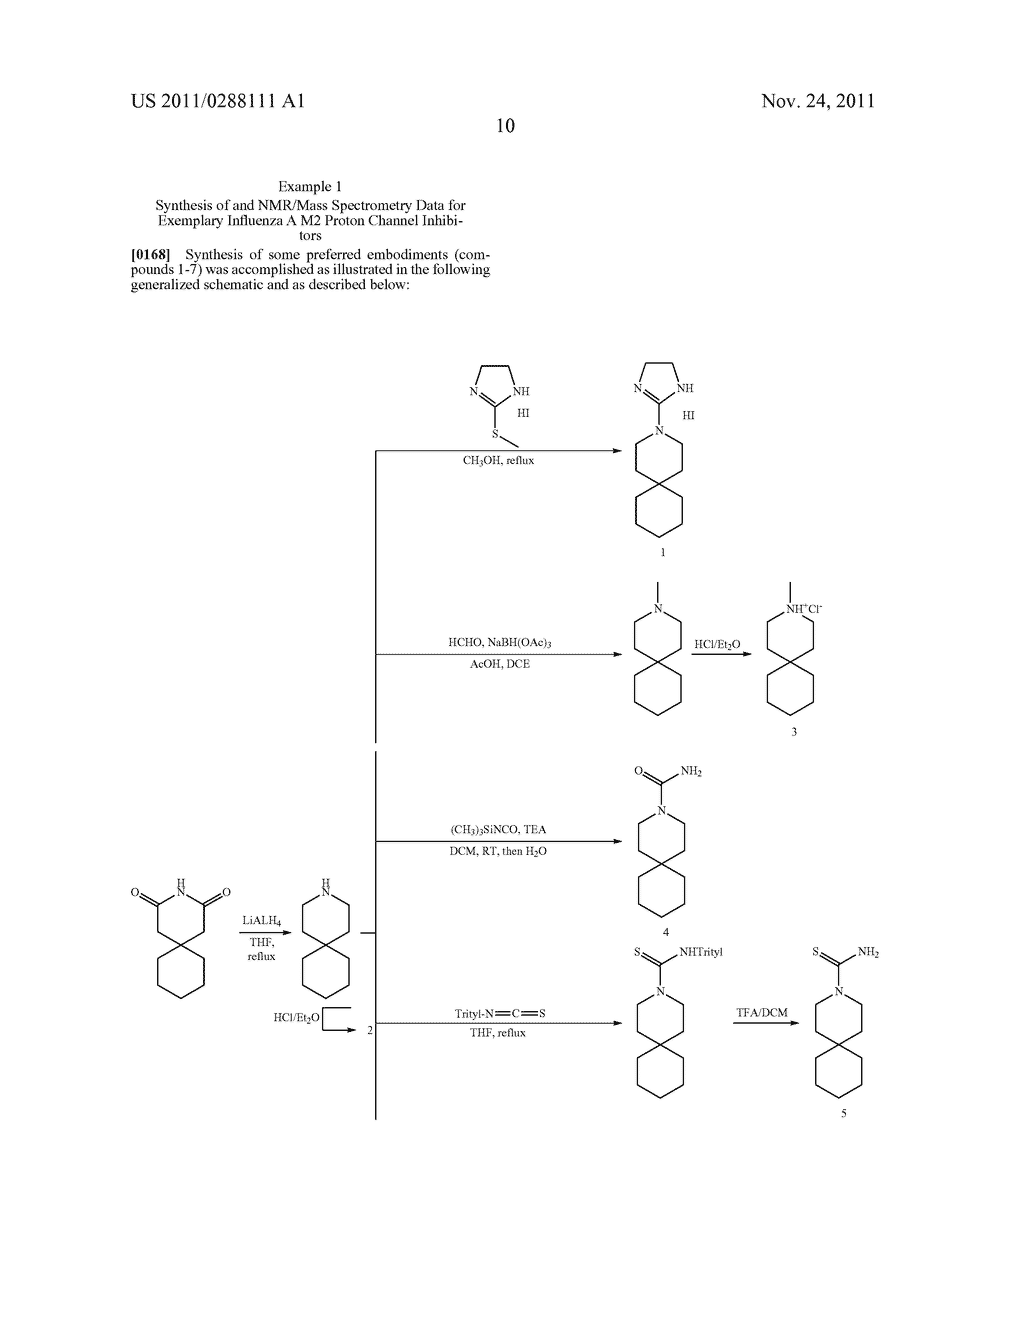 INHIBITION OF INFLUENZA M2 PROTON CHANNEL - diagram, schematic, and image 11